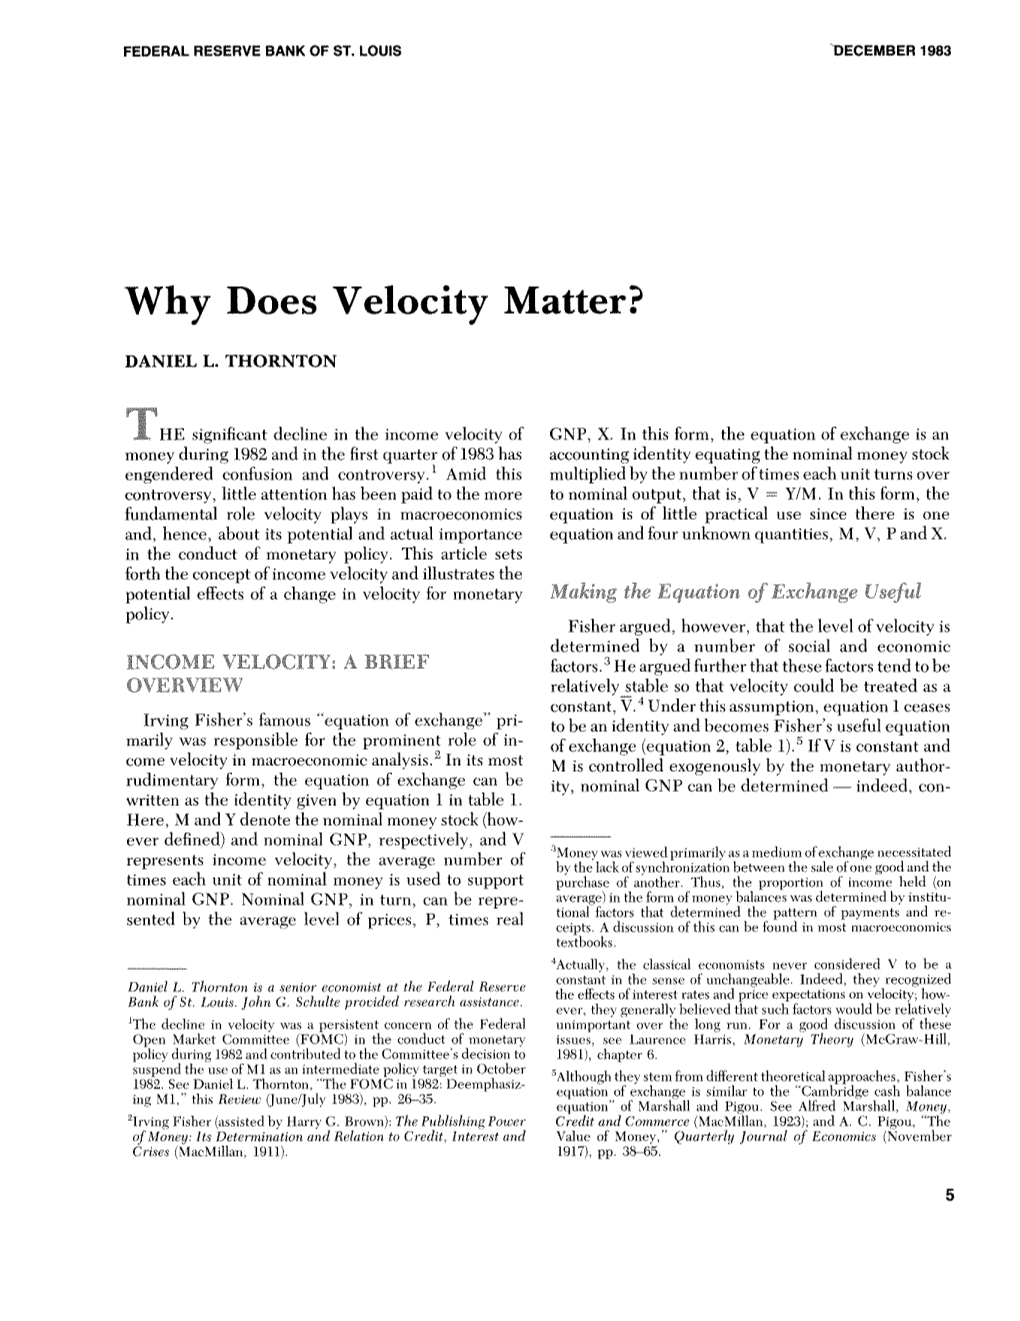 Why Does Velocity Matter?